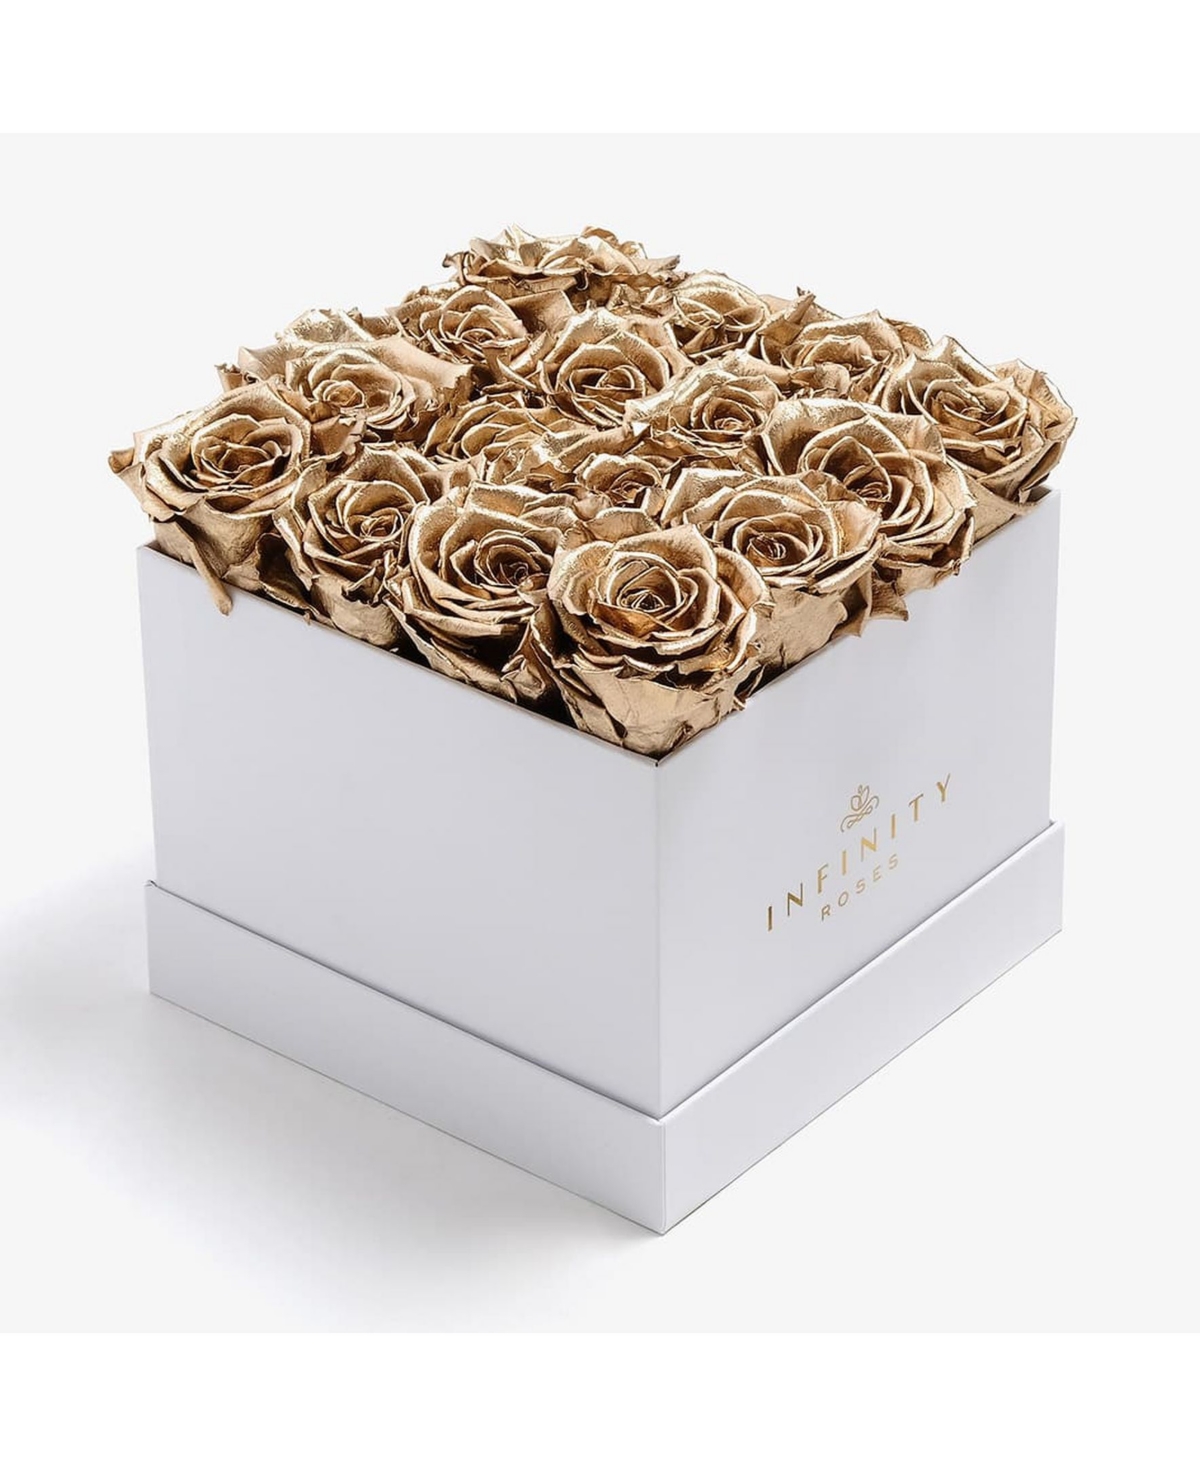 Square Box of 16 Gold Real Roses Preserved to Last Over A Year, Large - Gold-tone